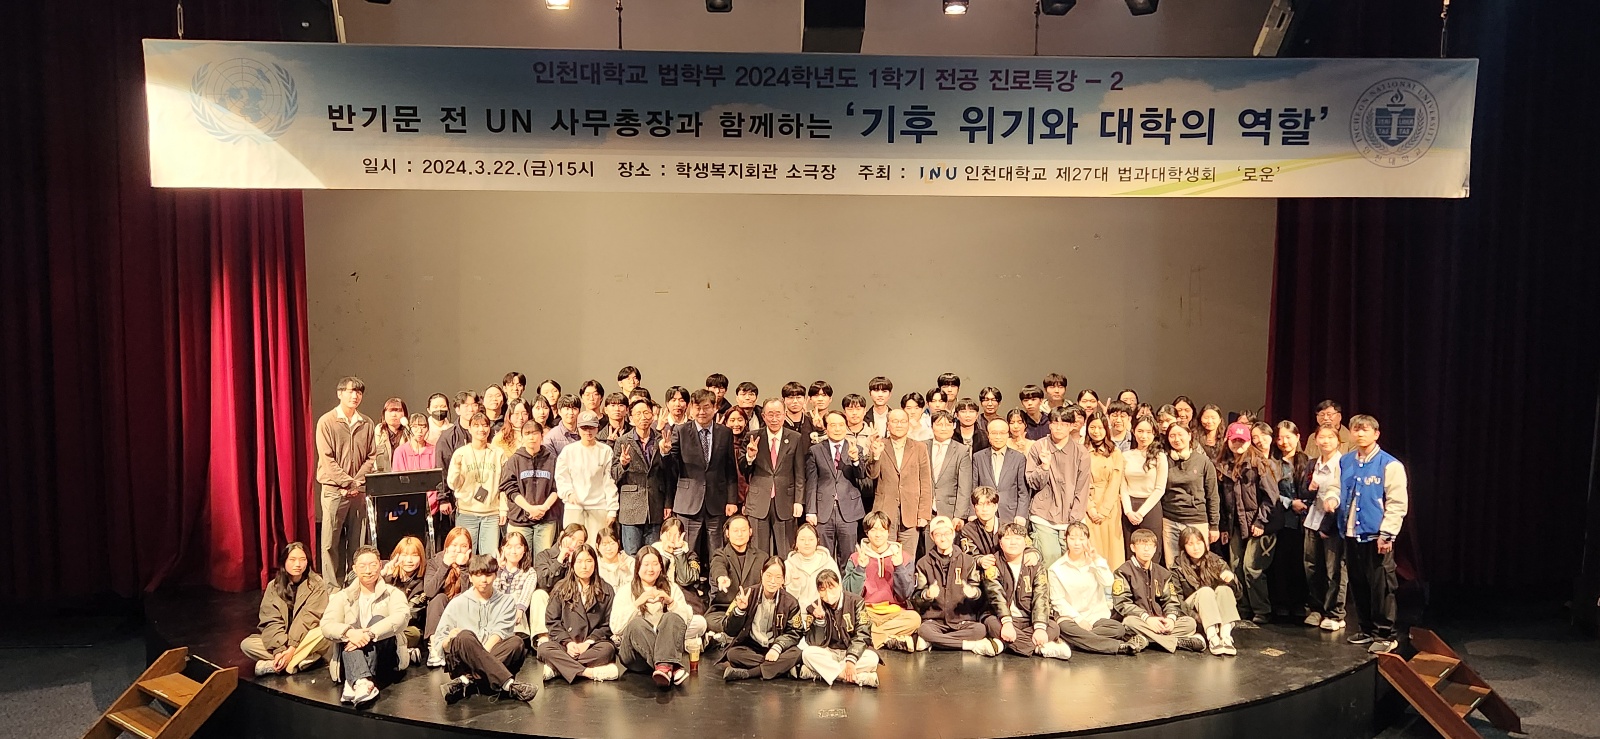 After the special lecture, a group photo of former UN Secretary-General Ban Ki-moon and special lecture participants